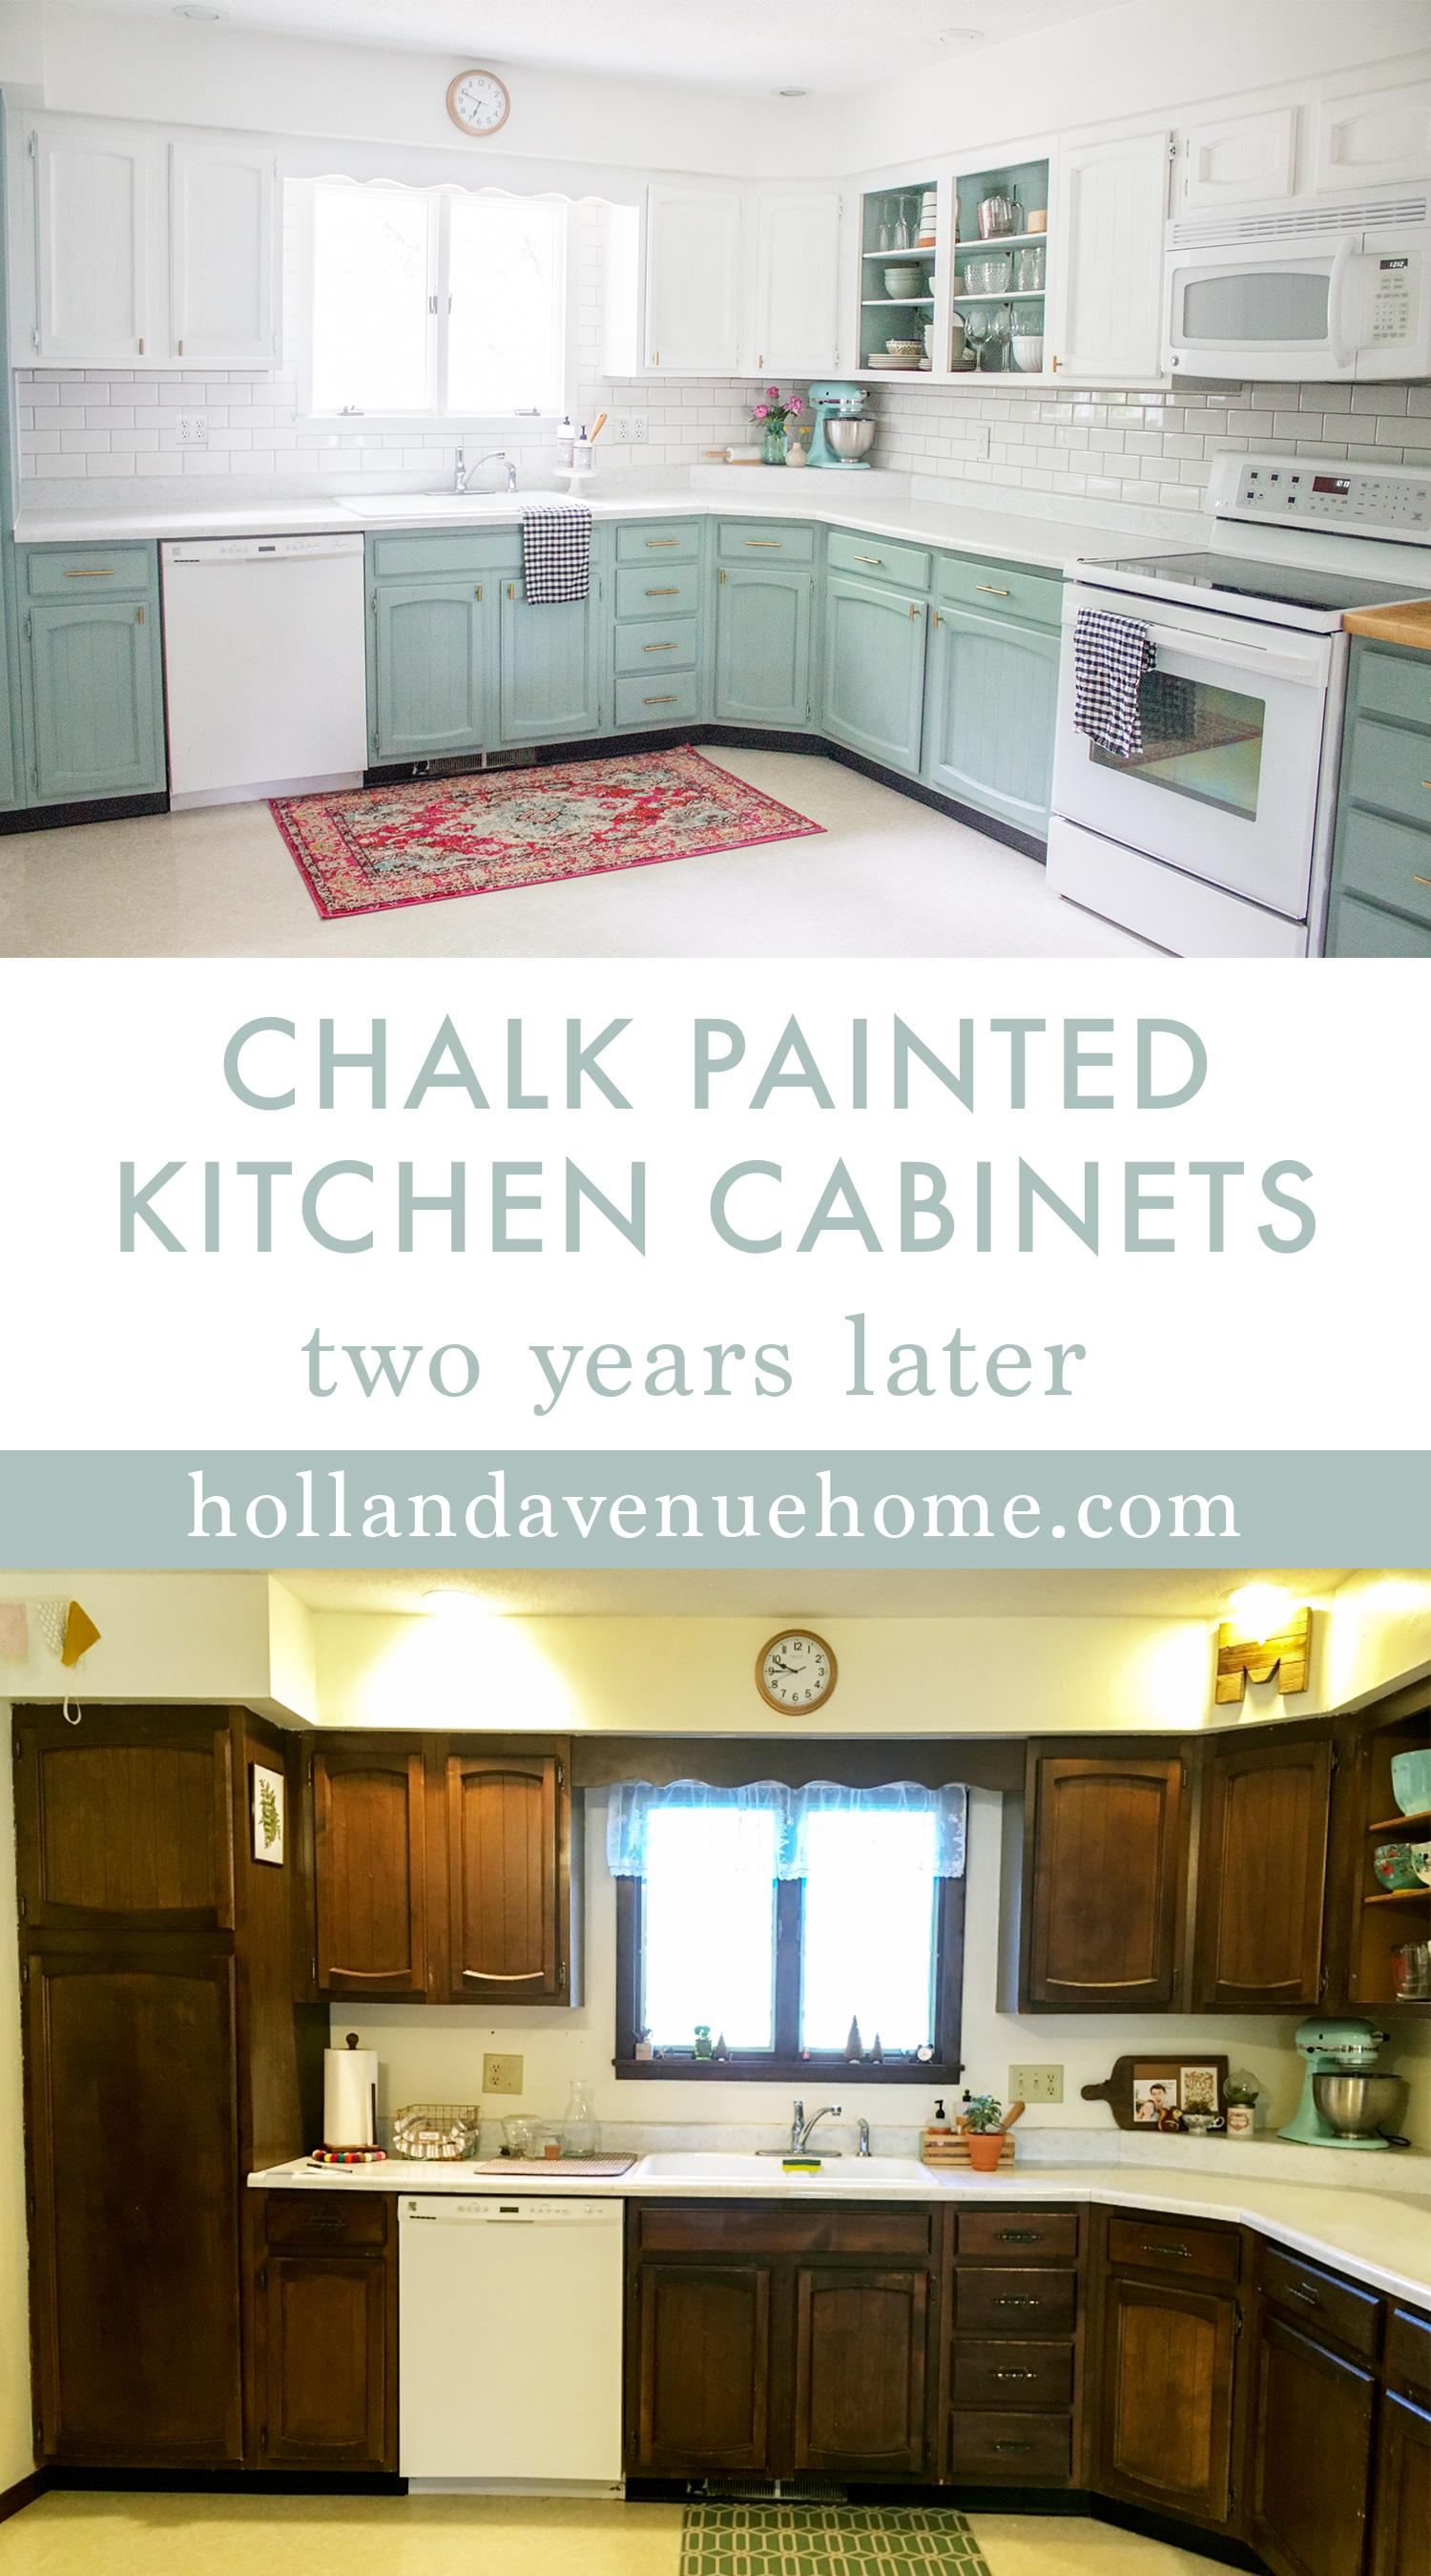 Chalk Painted Kitchen Cabinets Two Years Later   Holland Avenue Home